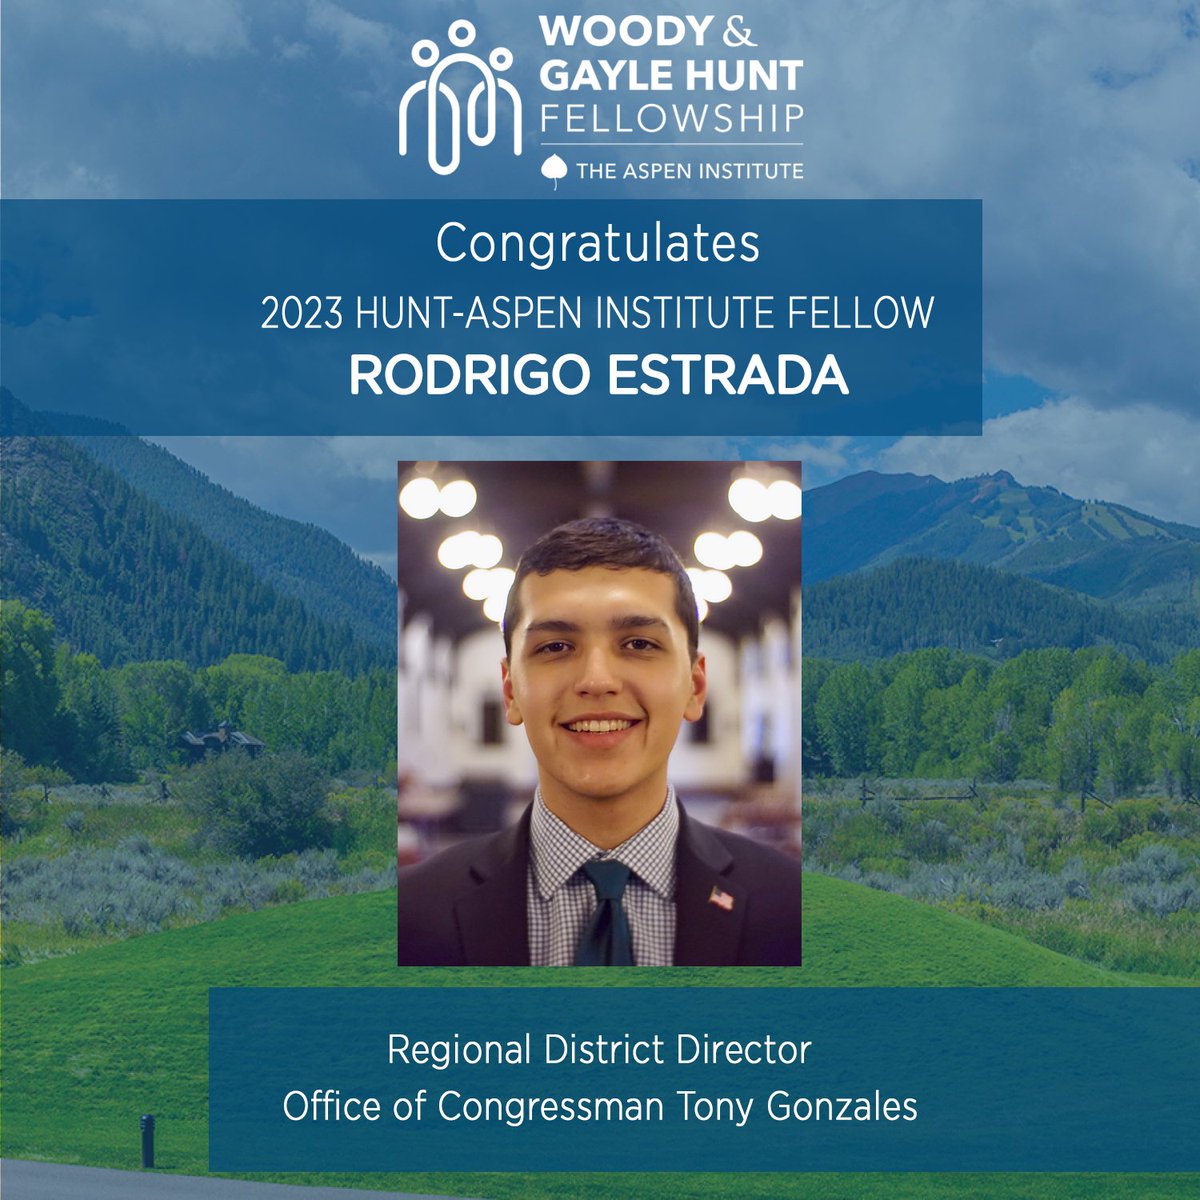 We are excited to announce that Rodrigo Estrada has been selected as a #HuntAspenFellow! Rodrigo serves as the Regional District Director for Congressman Tony Gonzales and is attending @AspenSocrates Summer Seminars next month. Congratulations, Rodrigo!